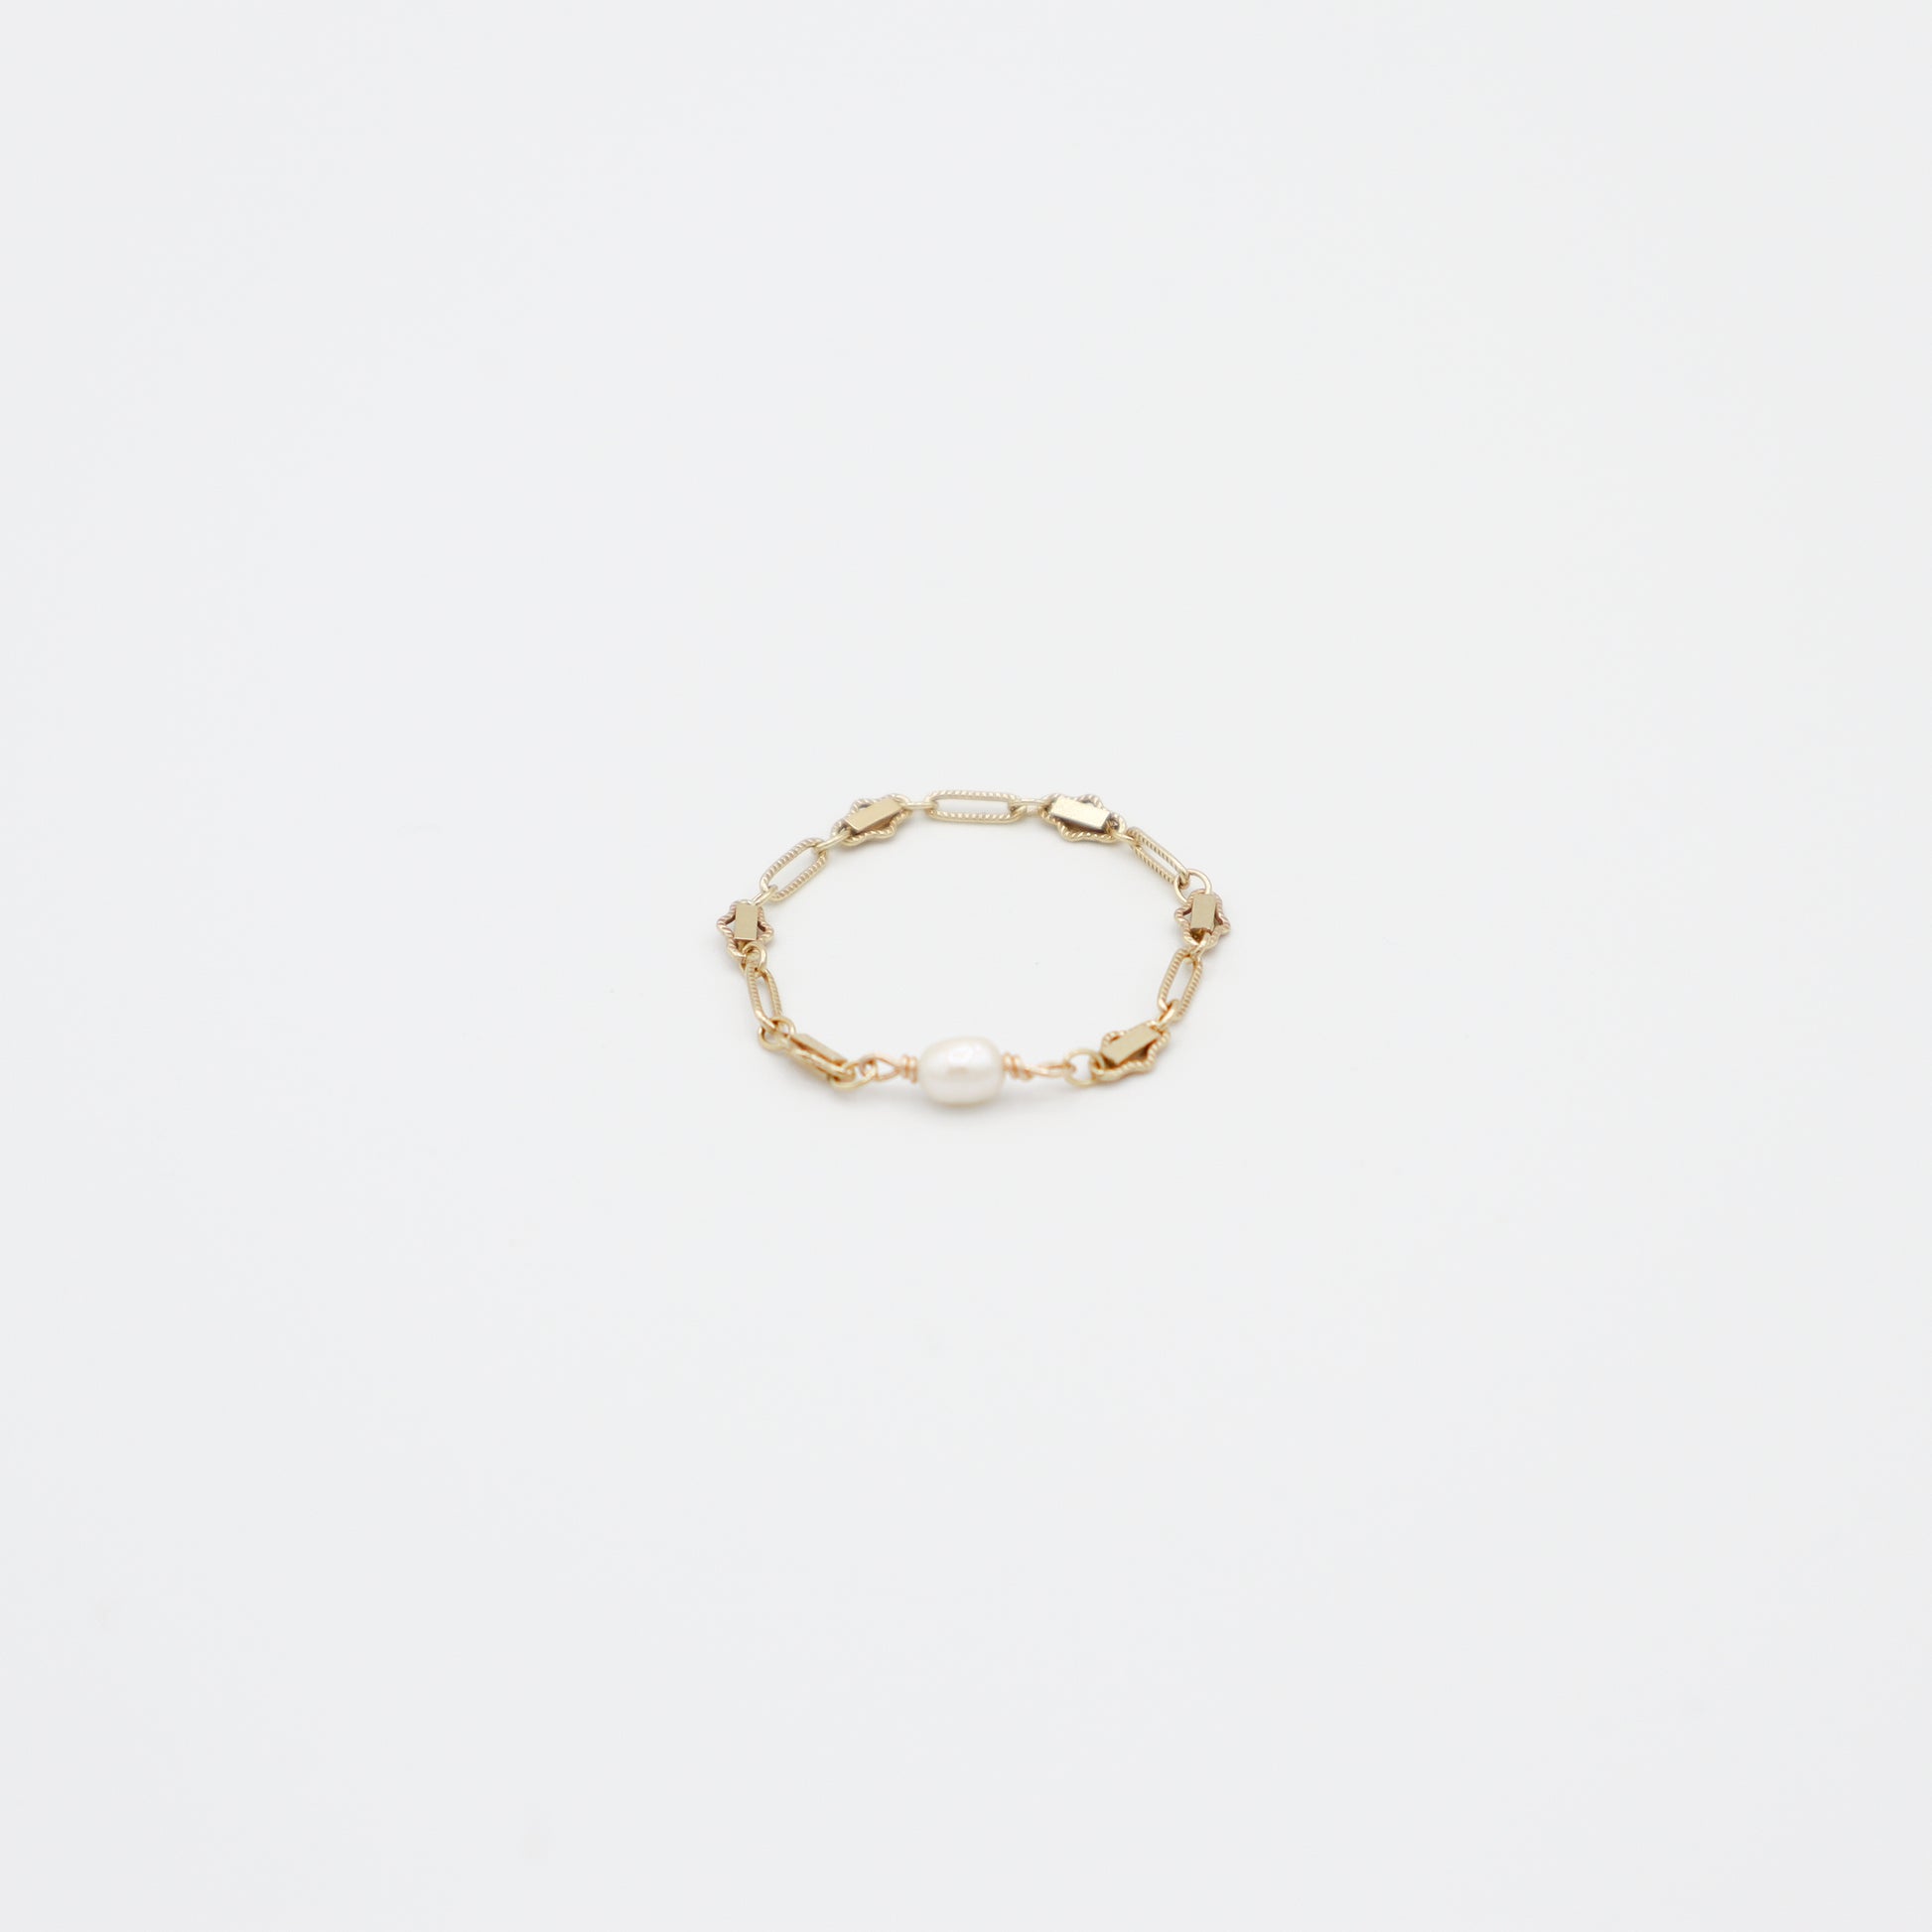 Roop Jewelry tiny pearl chain ring. Handmade 14k gold filled jewelry in Oakland, Ca.